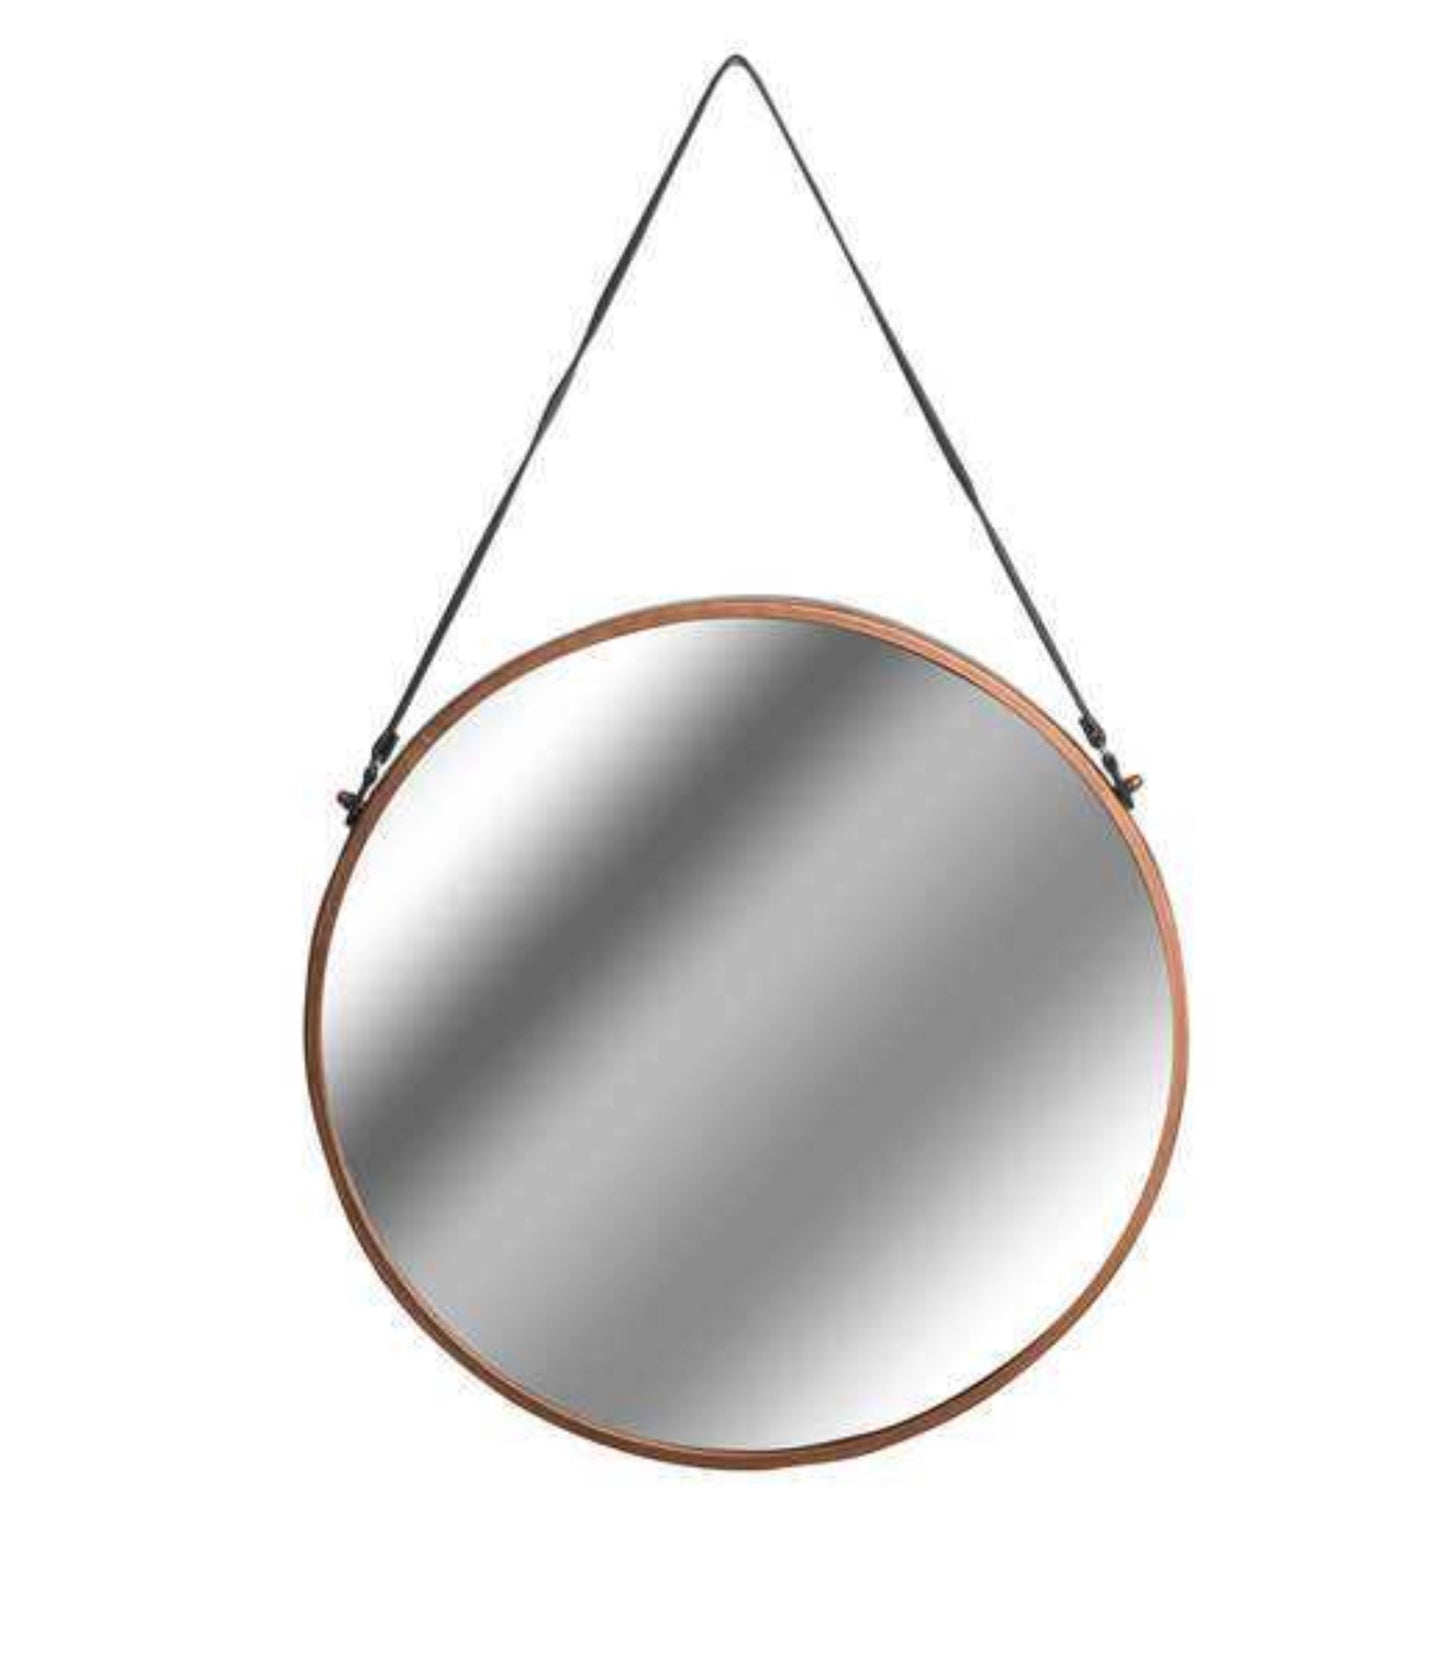 Copper Rimmed Round Hanging Wall Mirror With Black Strap - Unique Home Pieces